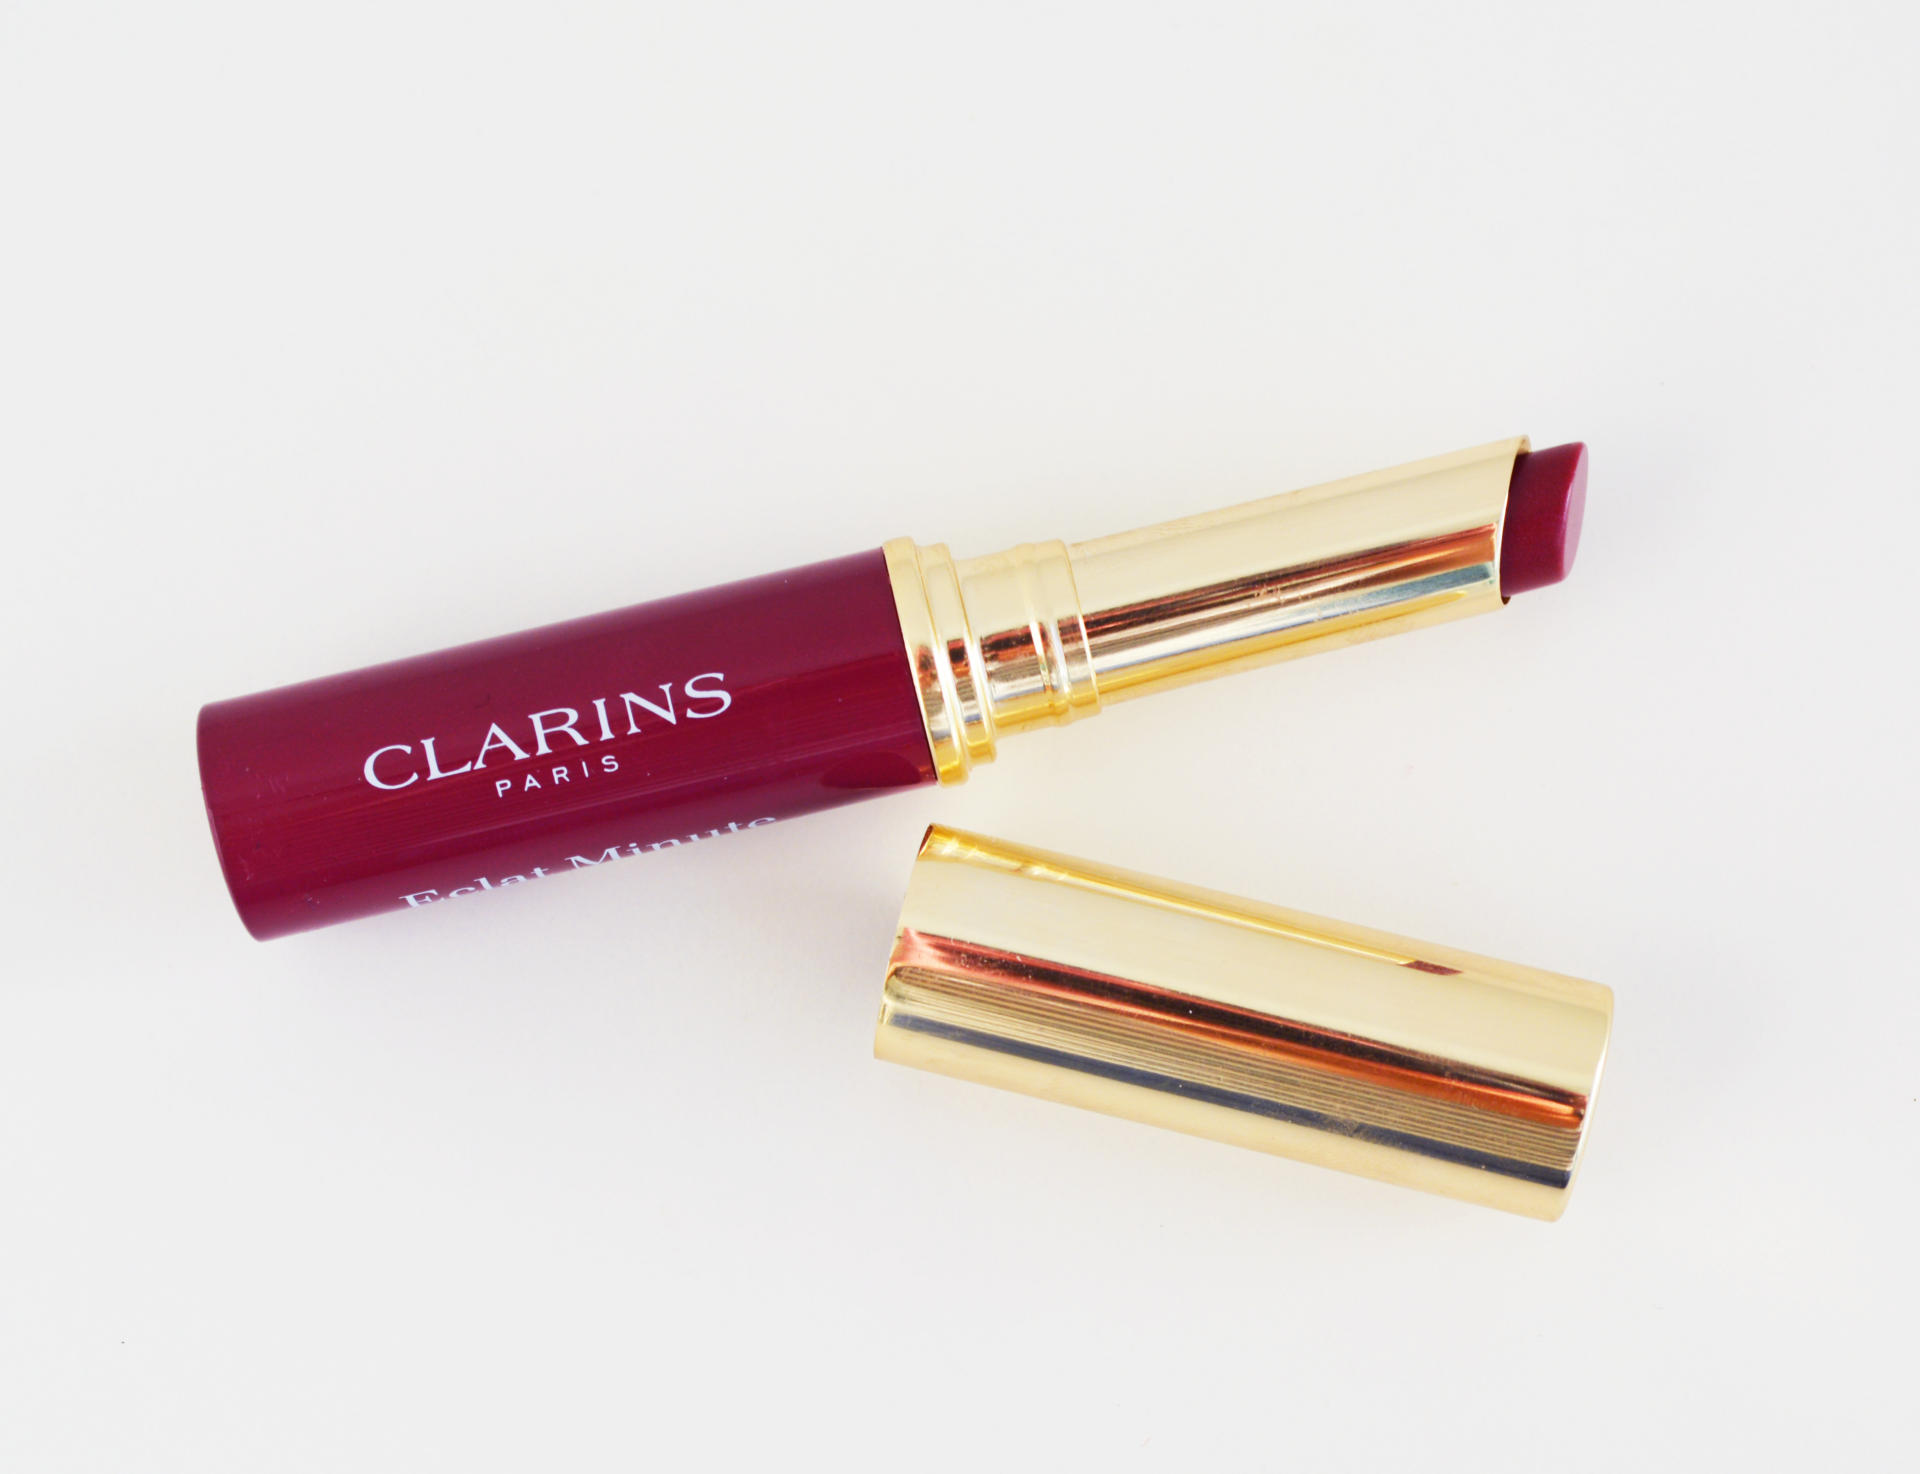 New In Clarins Makeup